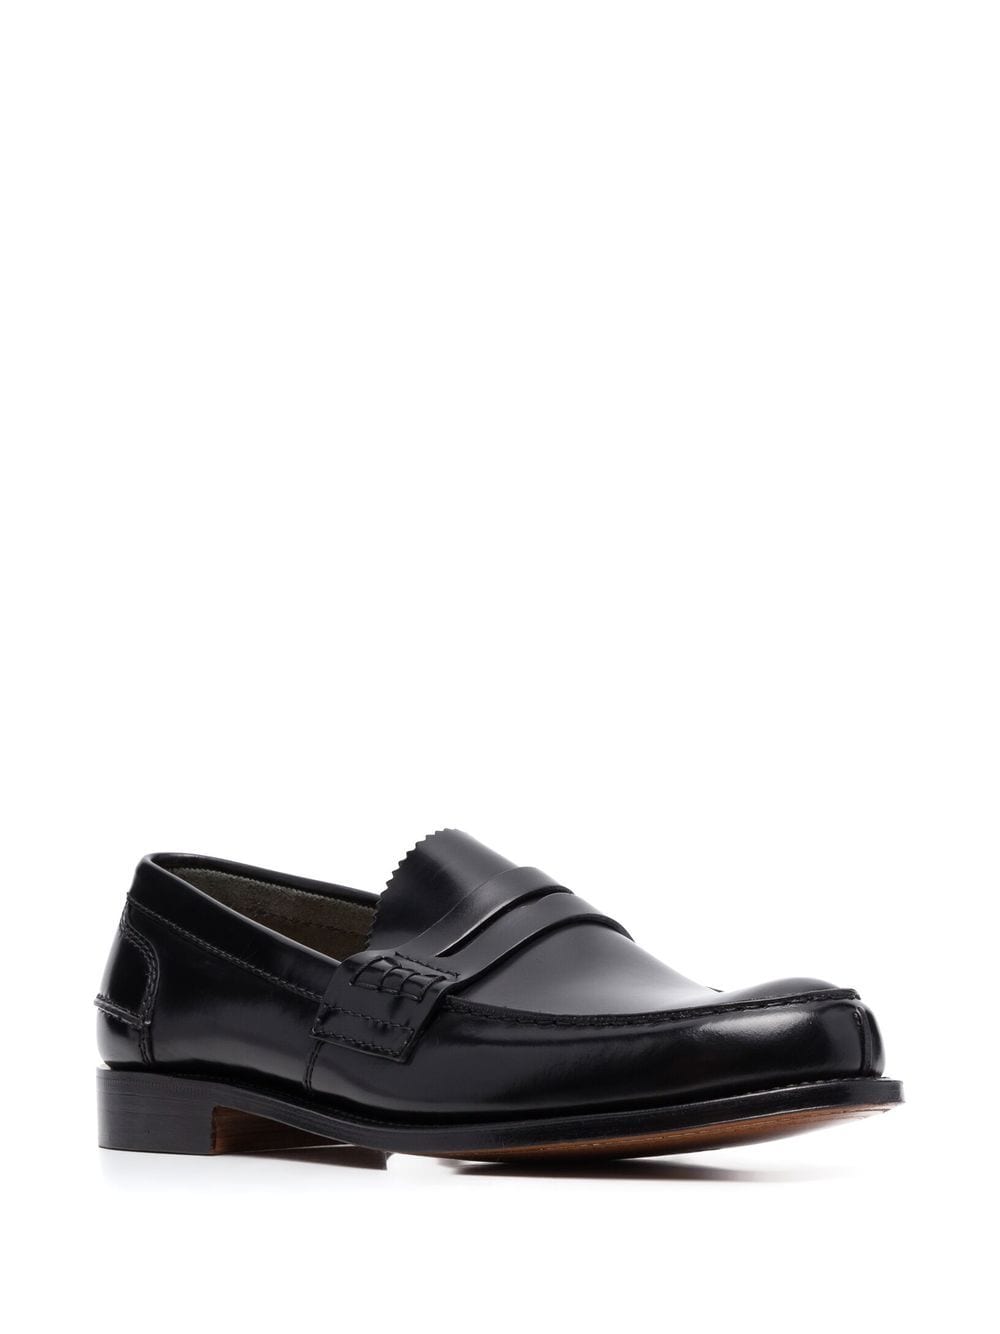 Image 2 of Church's Tunbridge leather penny loafers